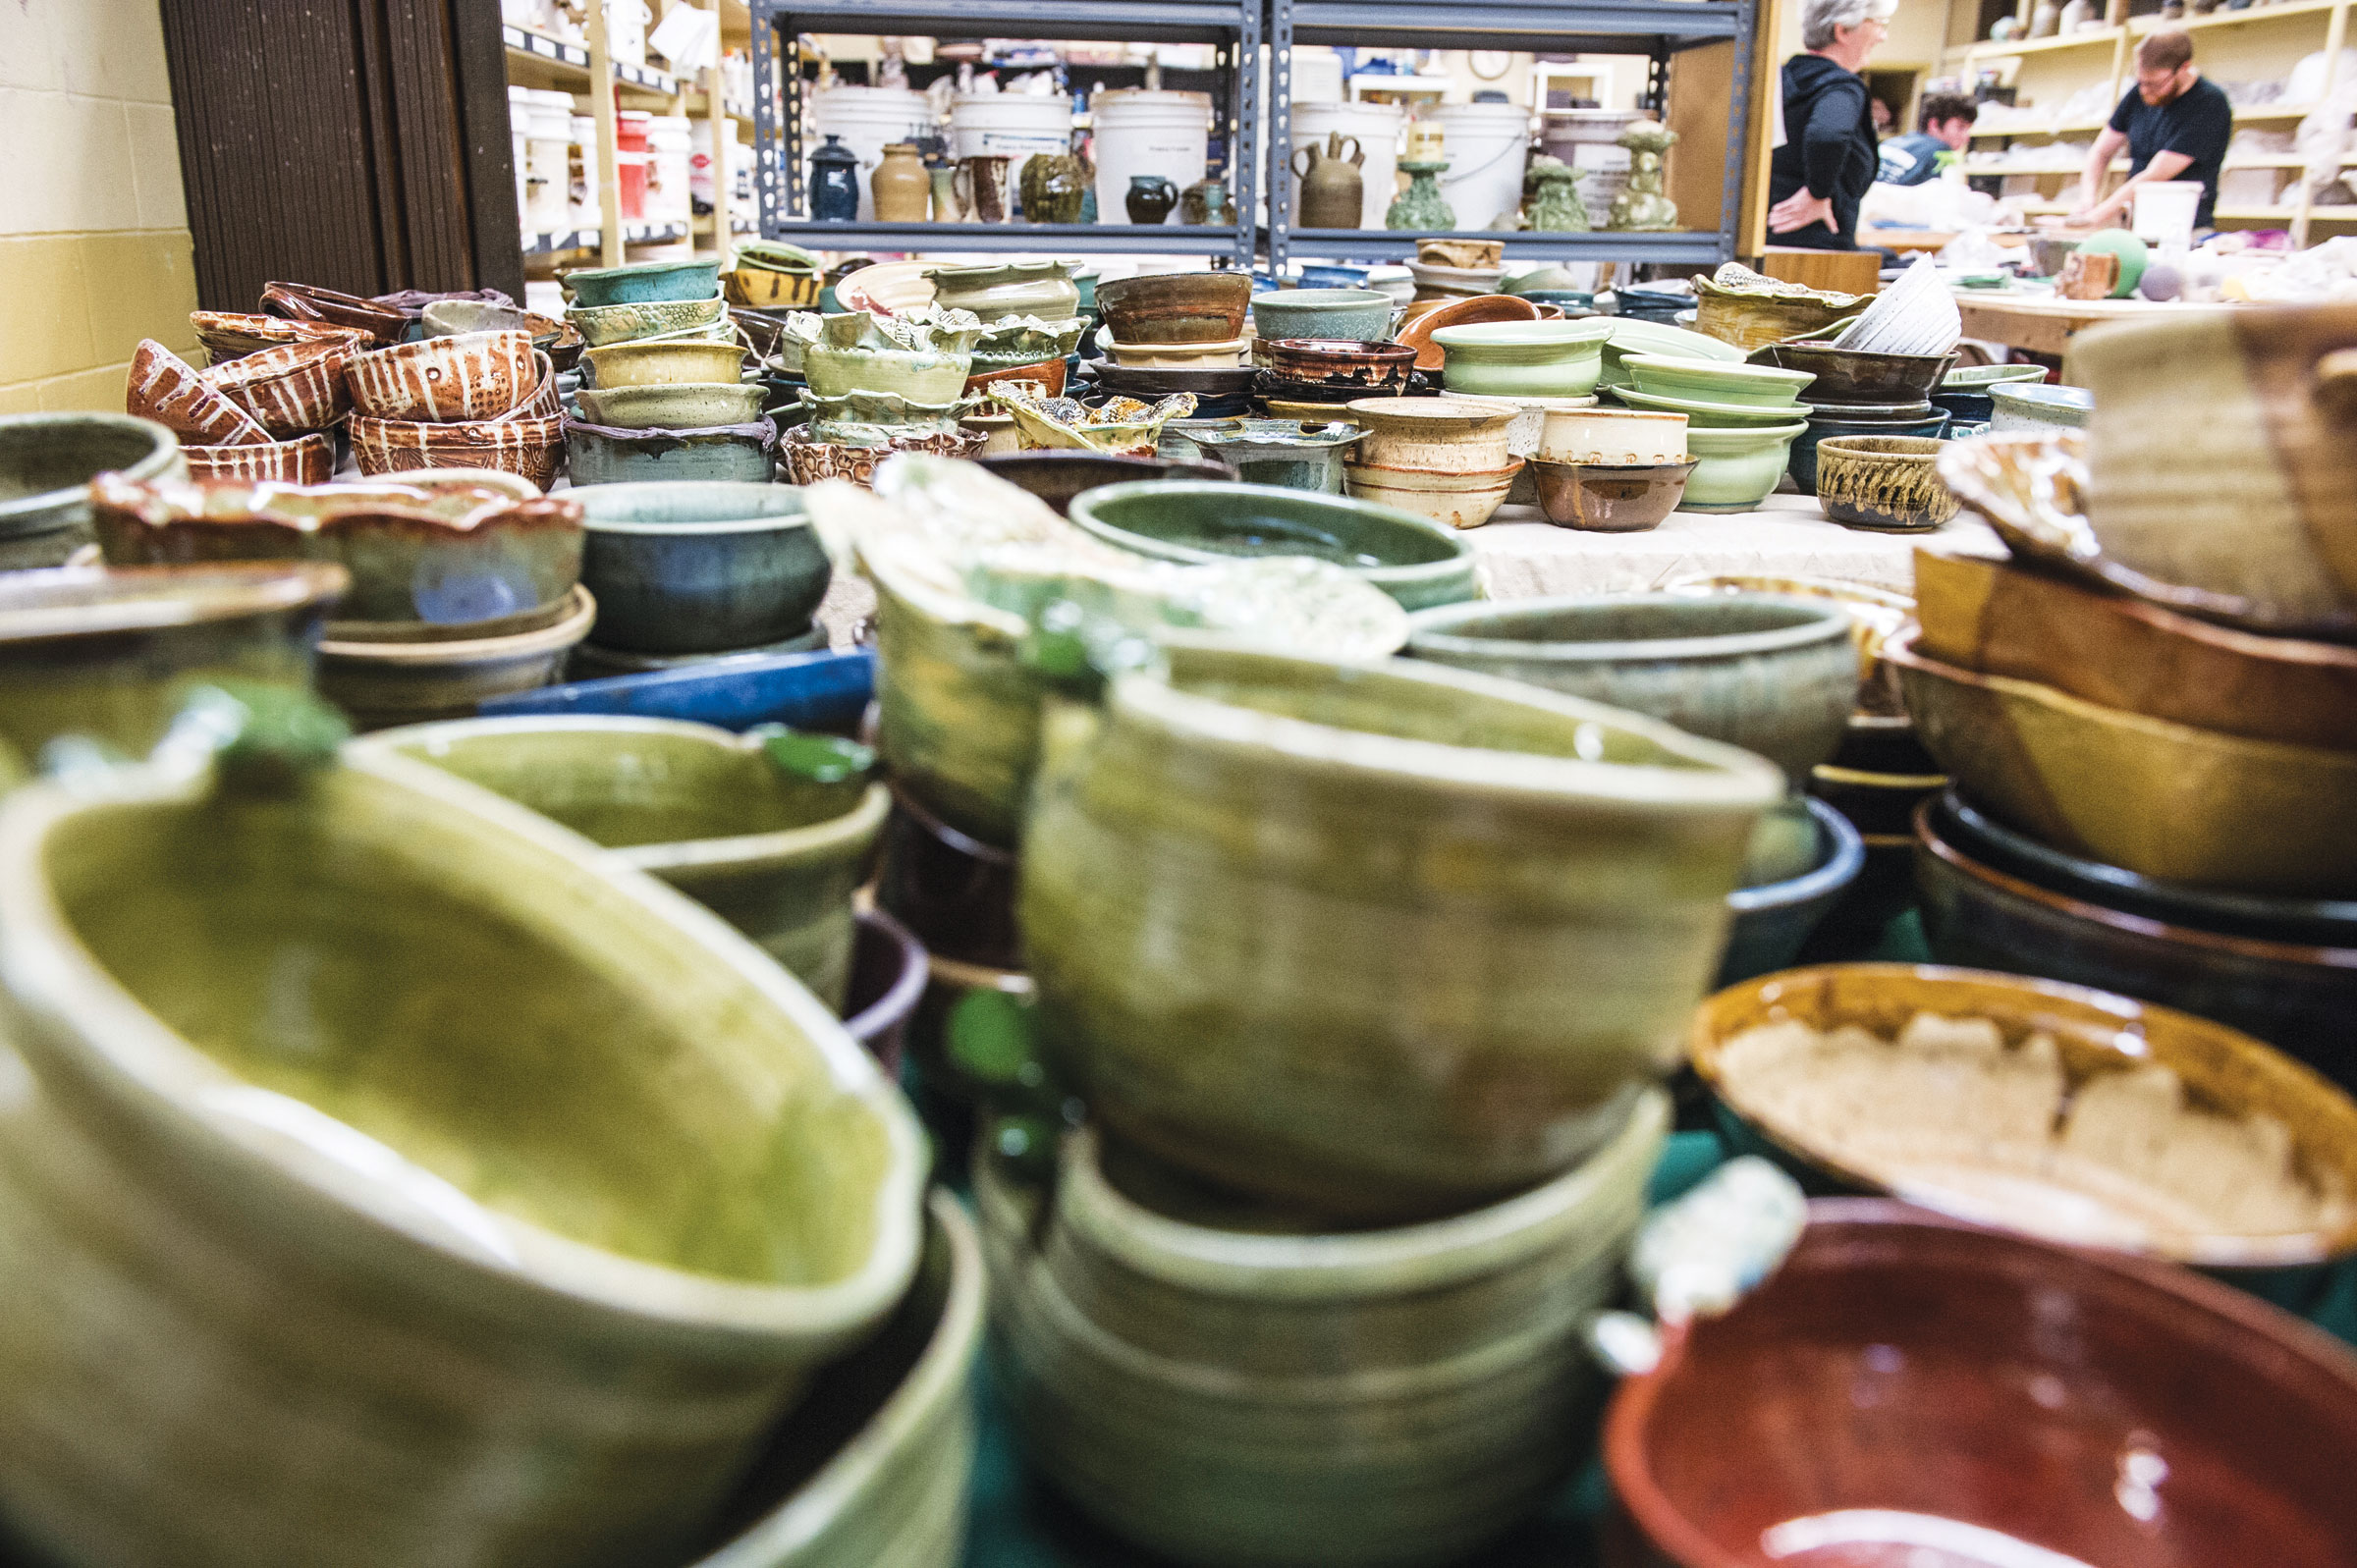 ‘Empty Bowls’ returns to Opelika, pre-sale launches Nov. 21